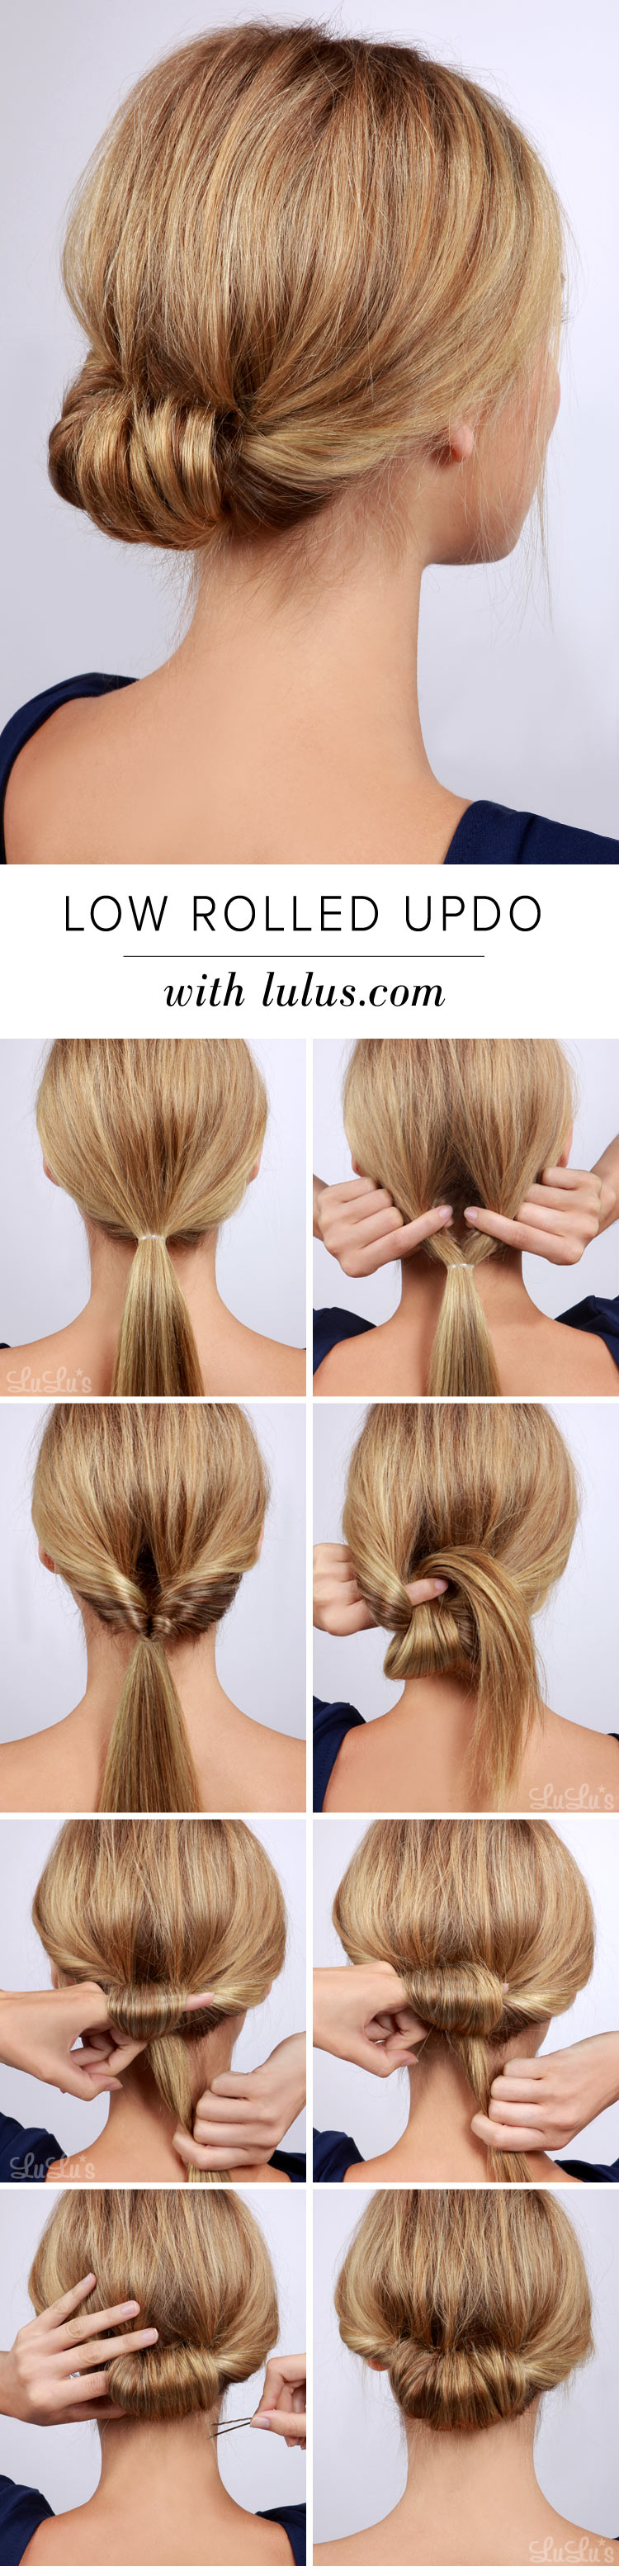 easy-ways-to-put-short-hair-up-95 Easy ways to put short hair up